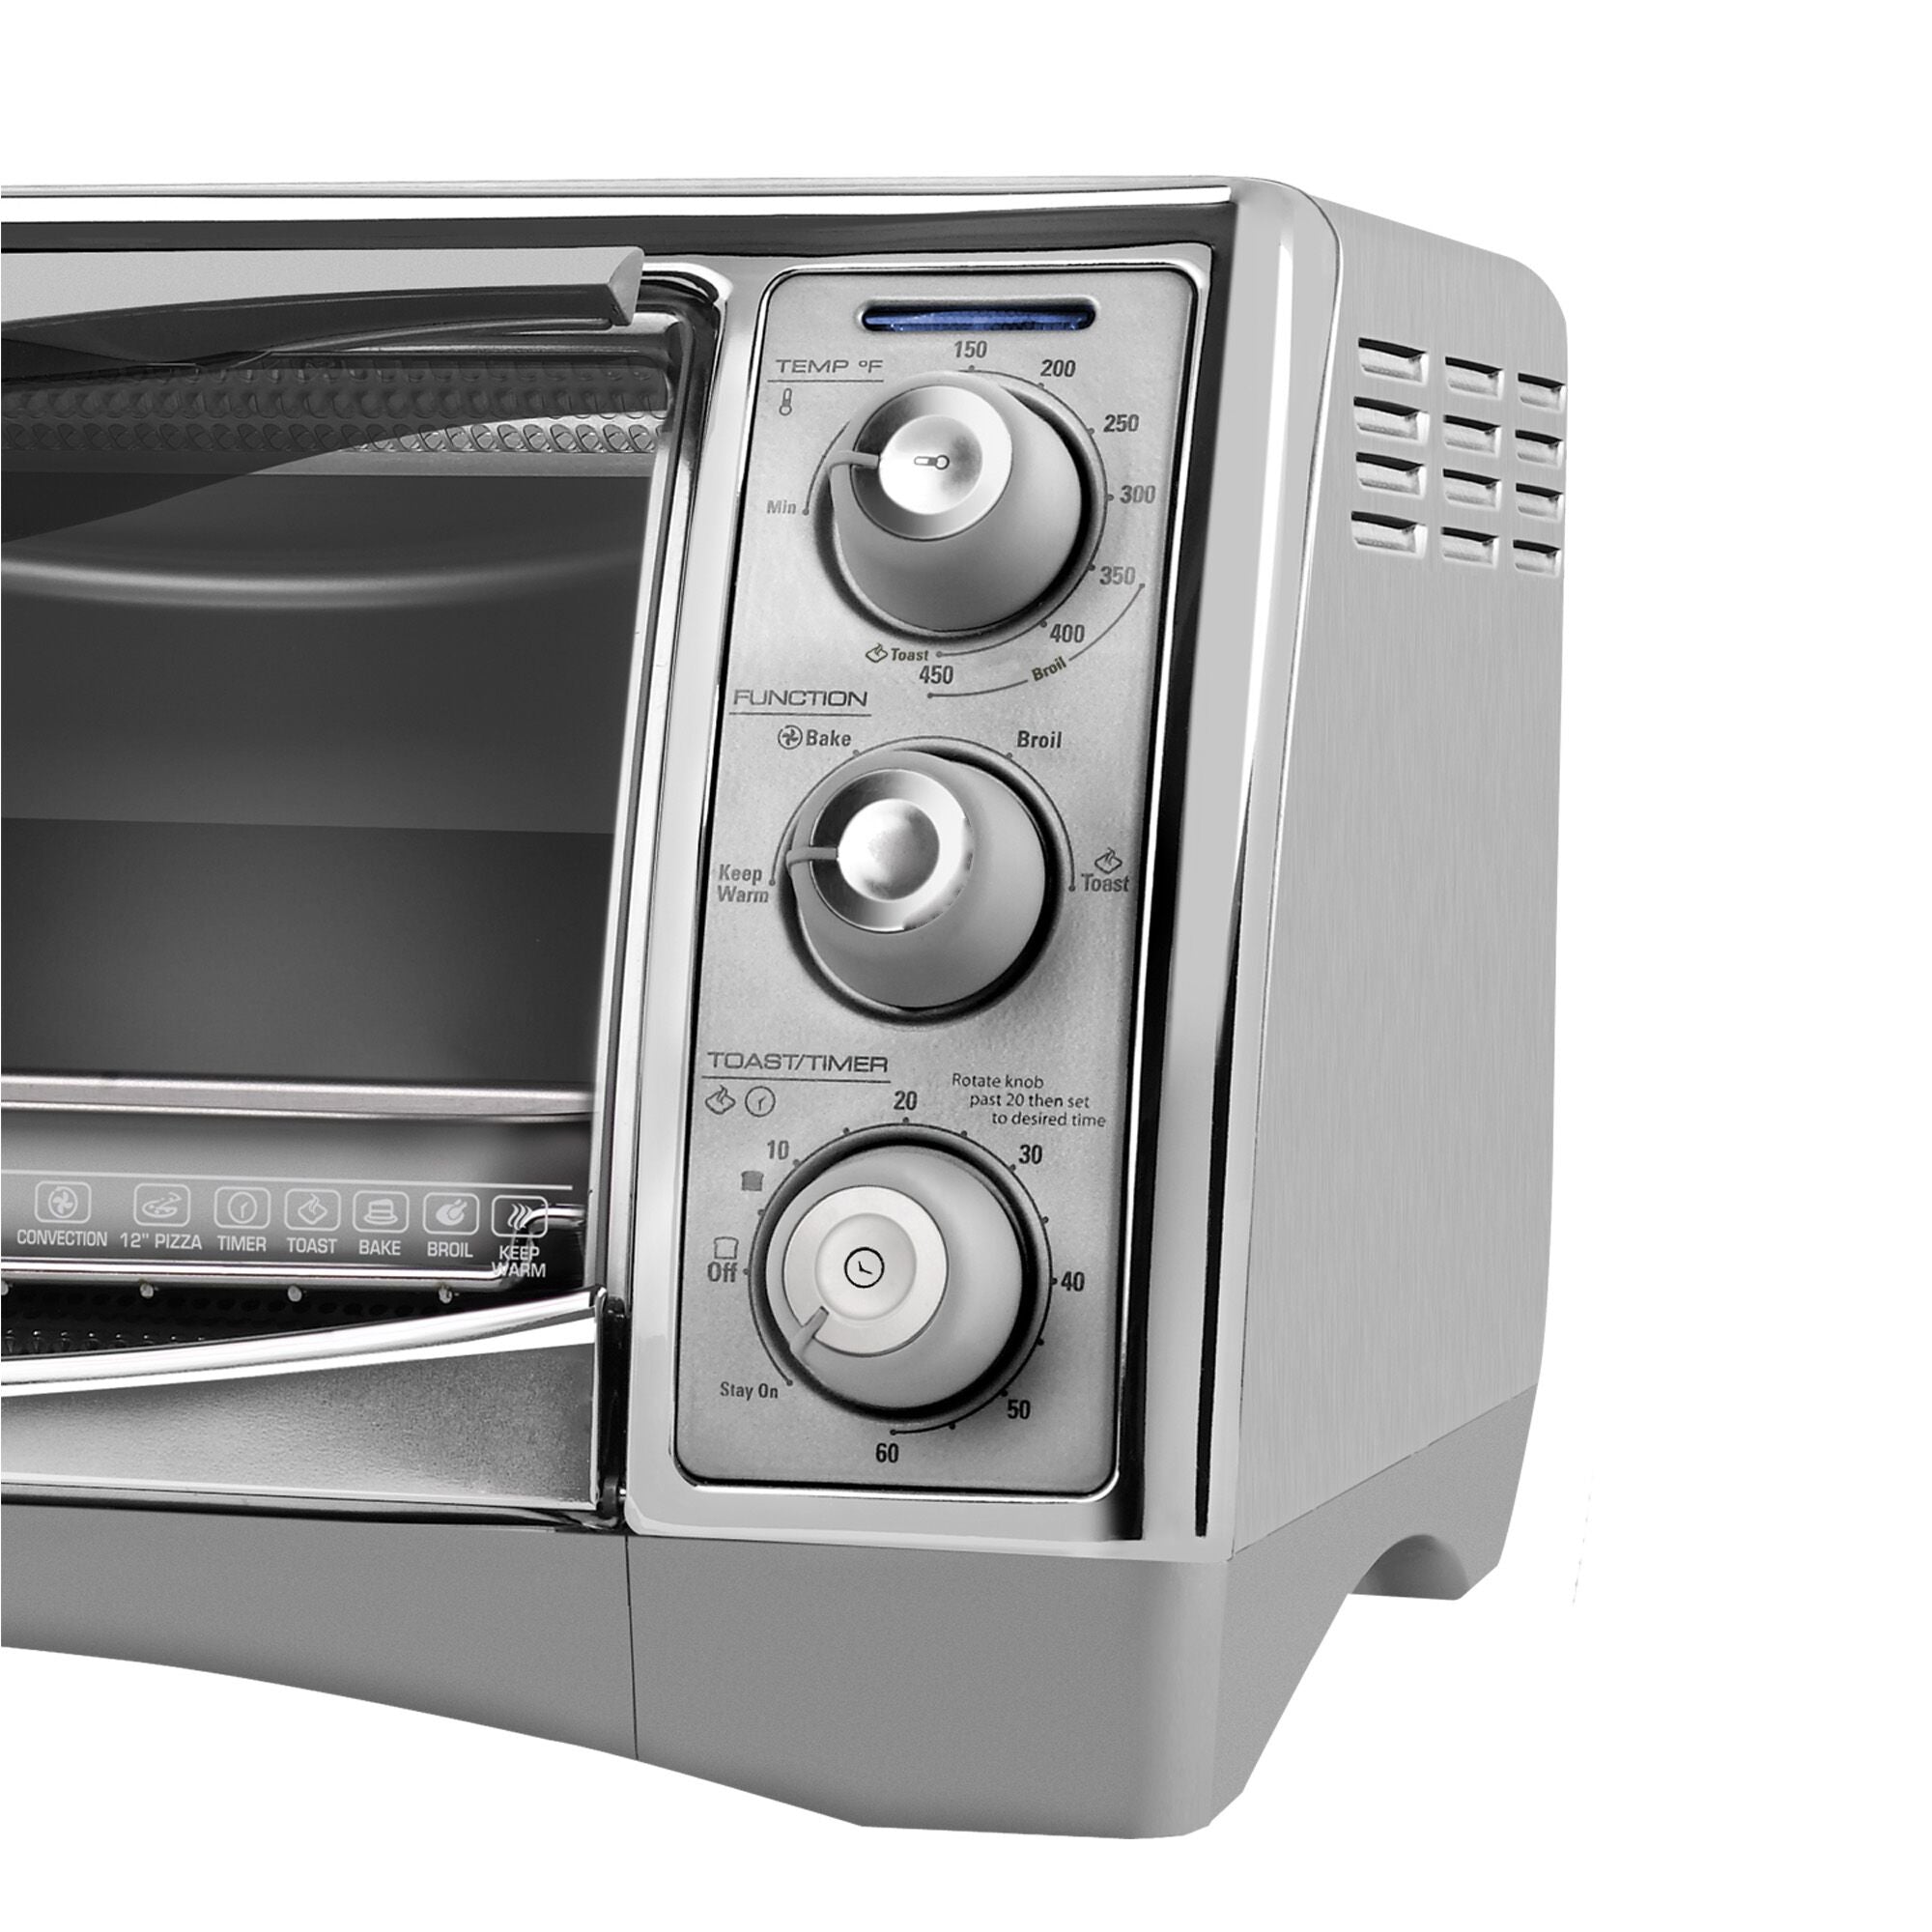 BLACK + DECKER 6-Slice 1500W Convection Toaster Oven - TO3000G